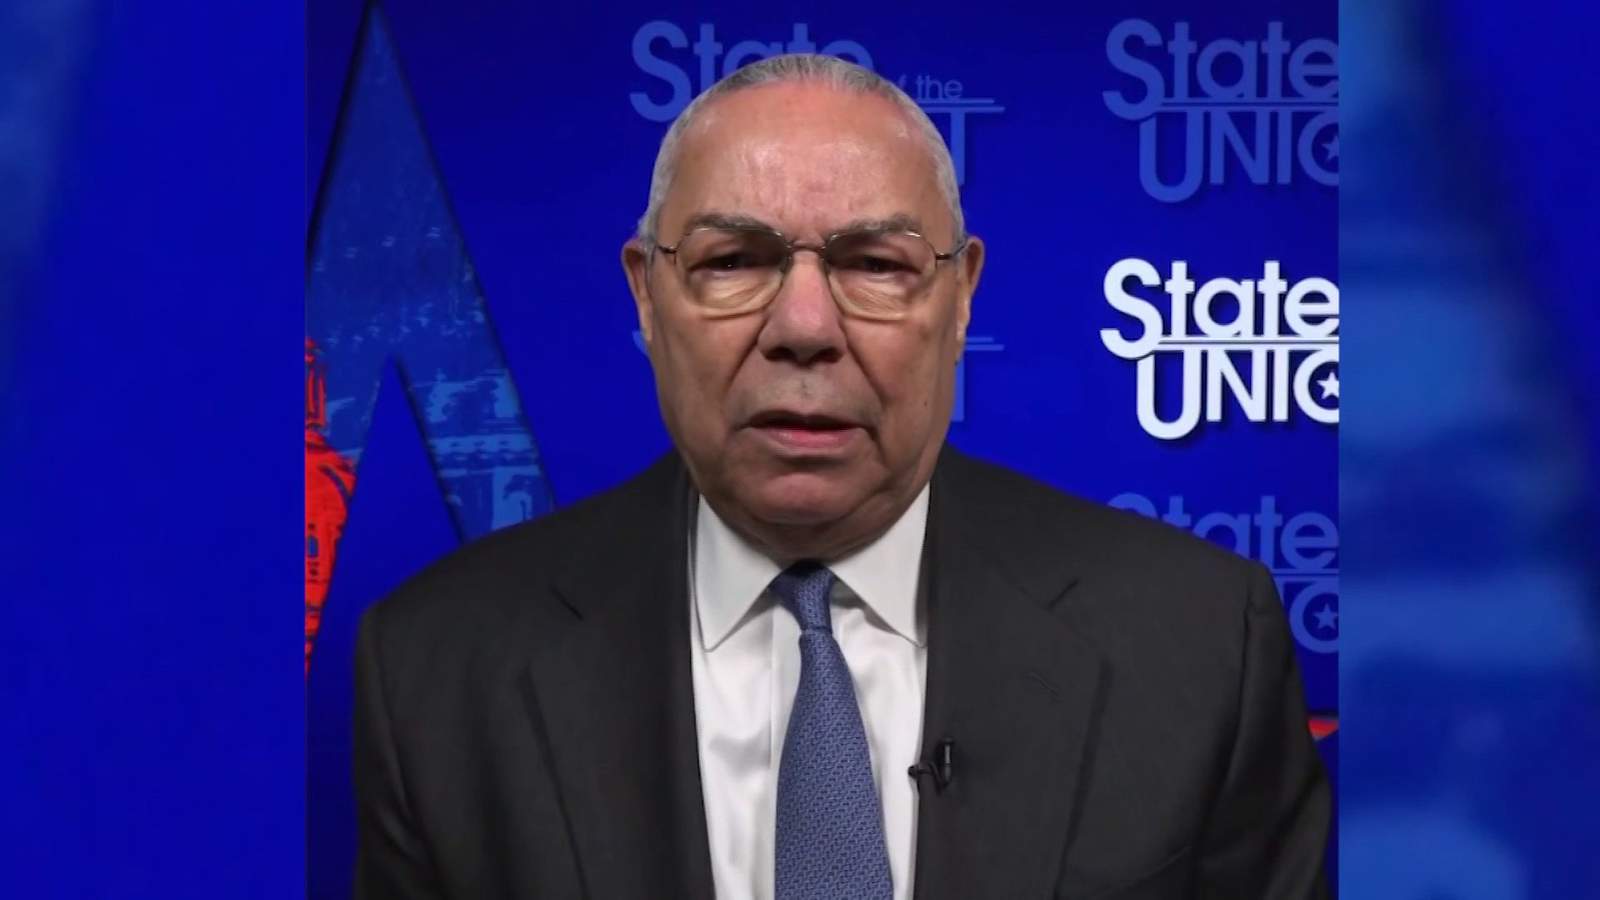 Colin Powell will vote for Biden, says Trump has drifted away from the Constitution